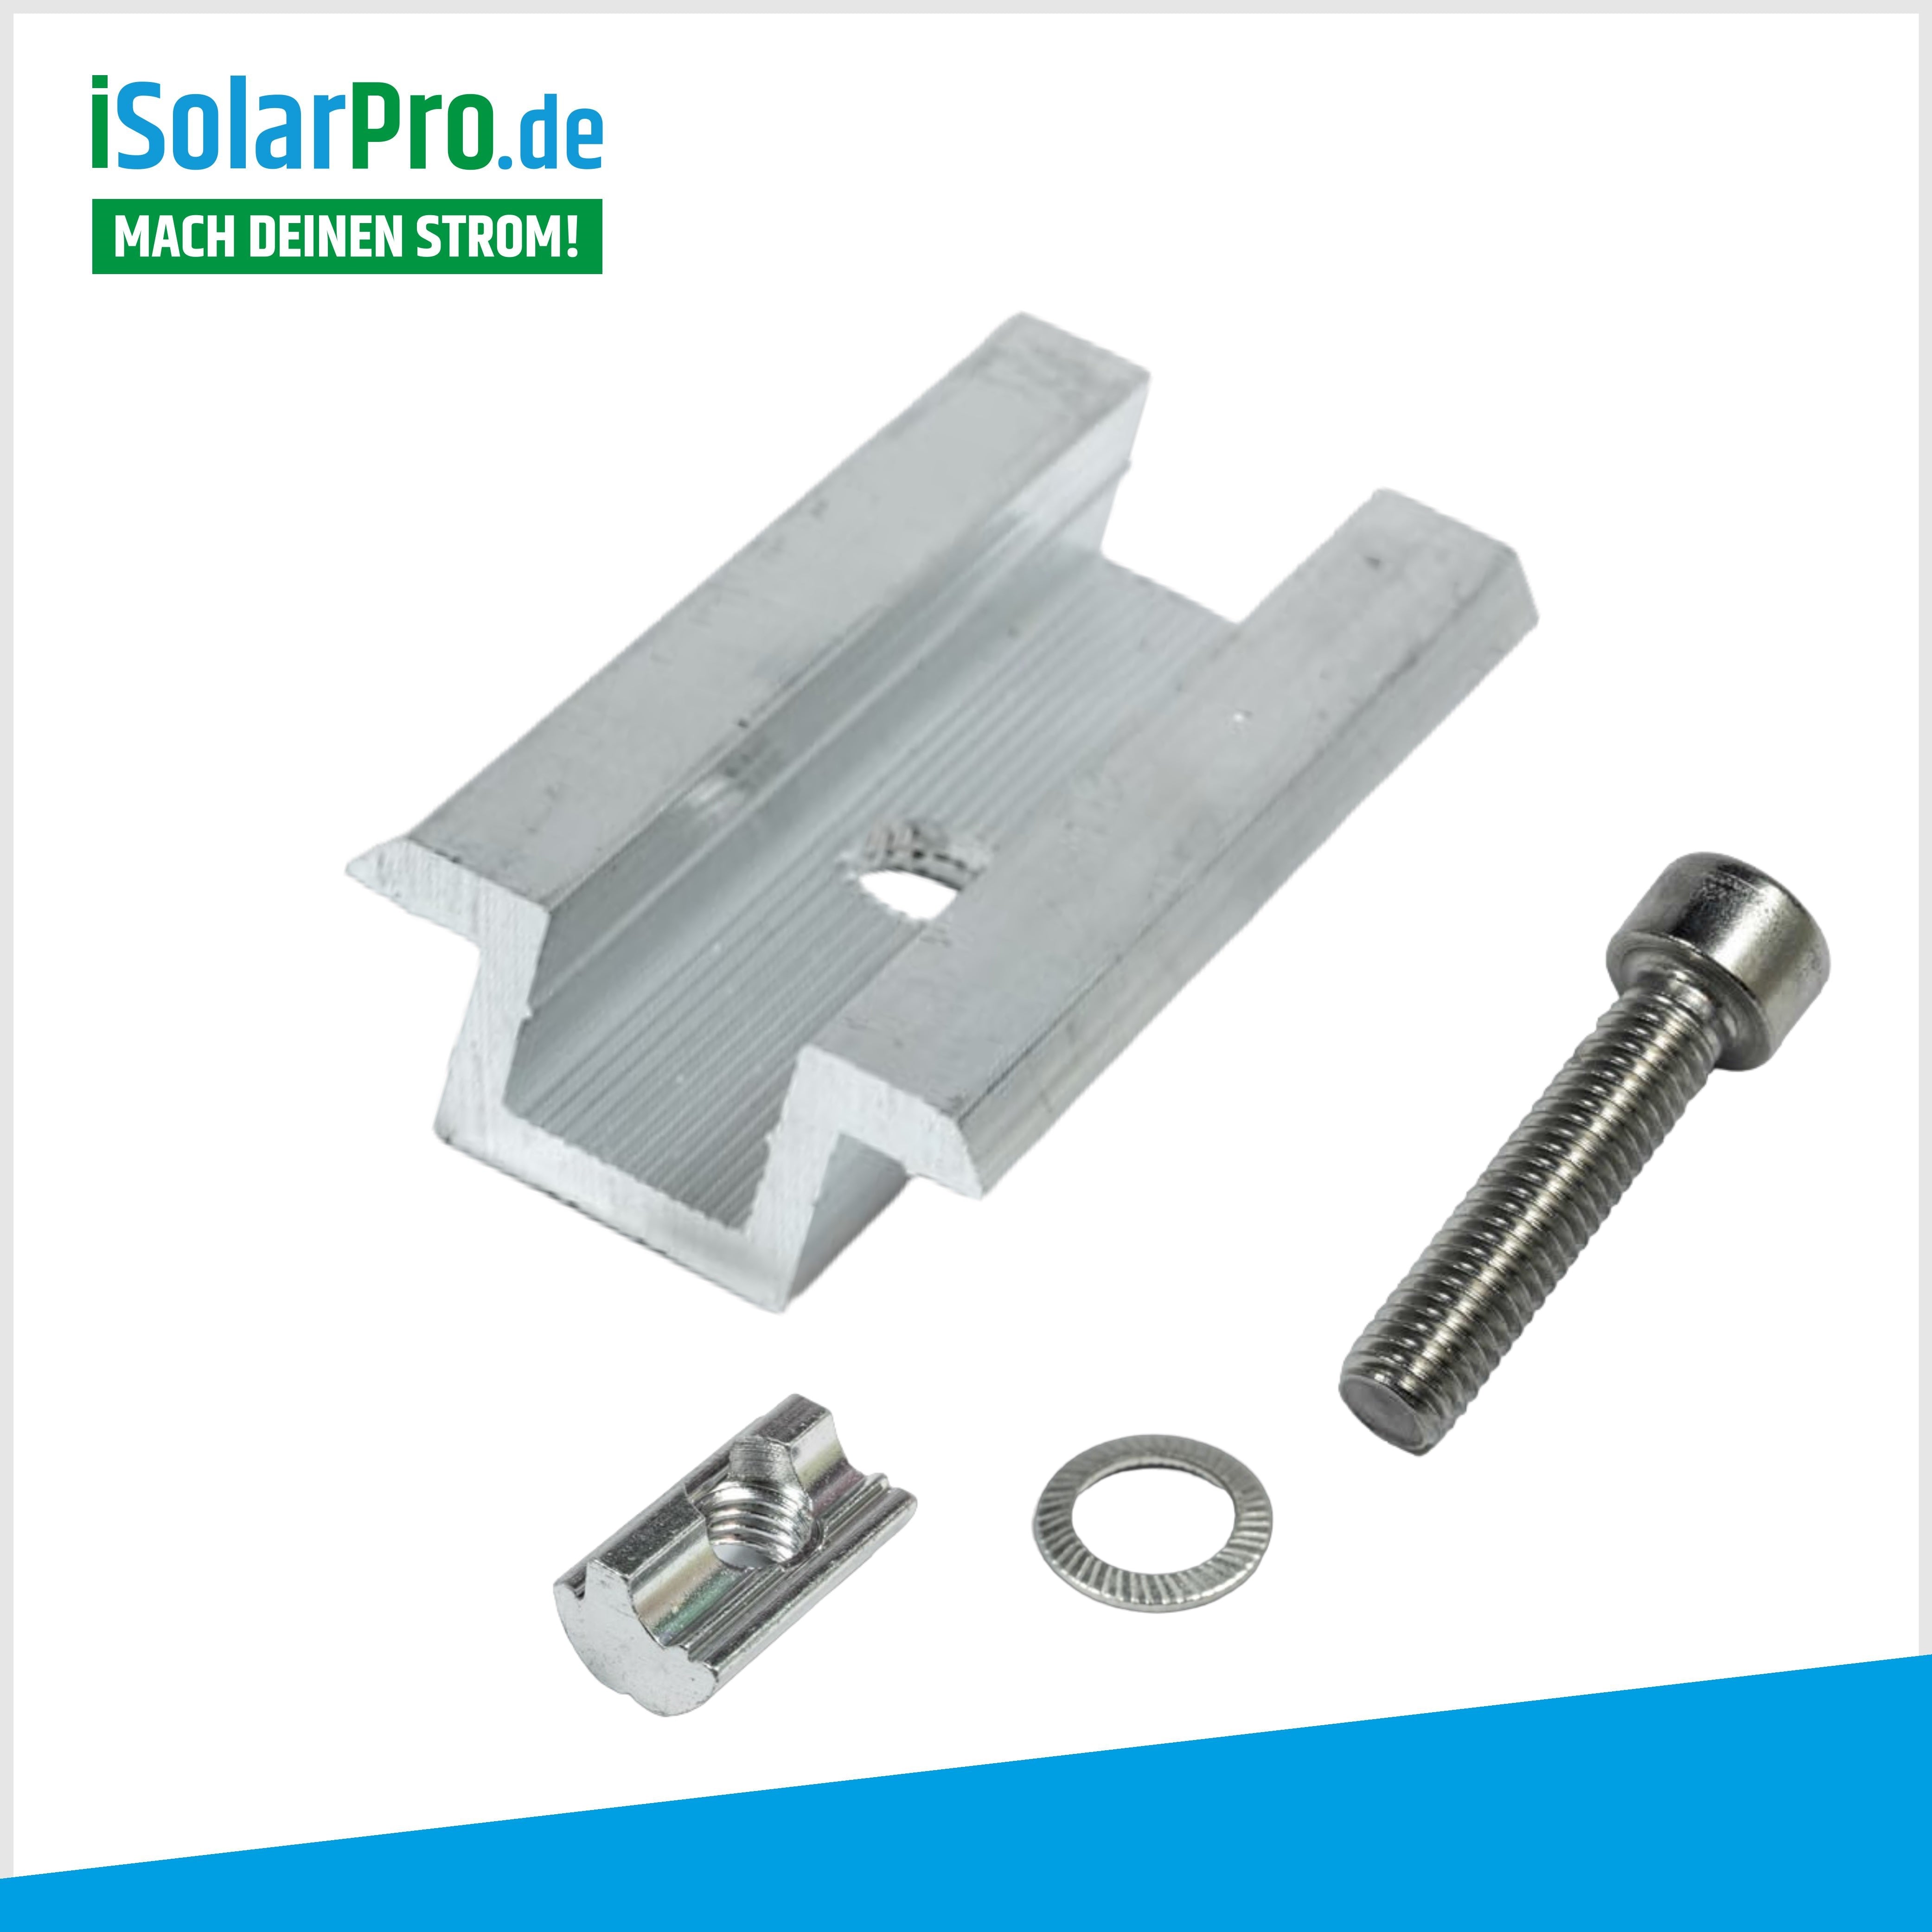 30/35/40mm ALU middle clamps for solar modules, photovoltaic PV assembly